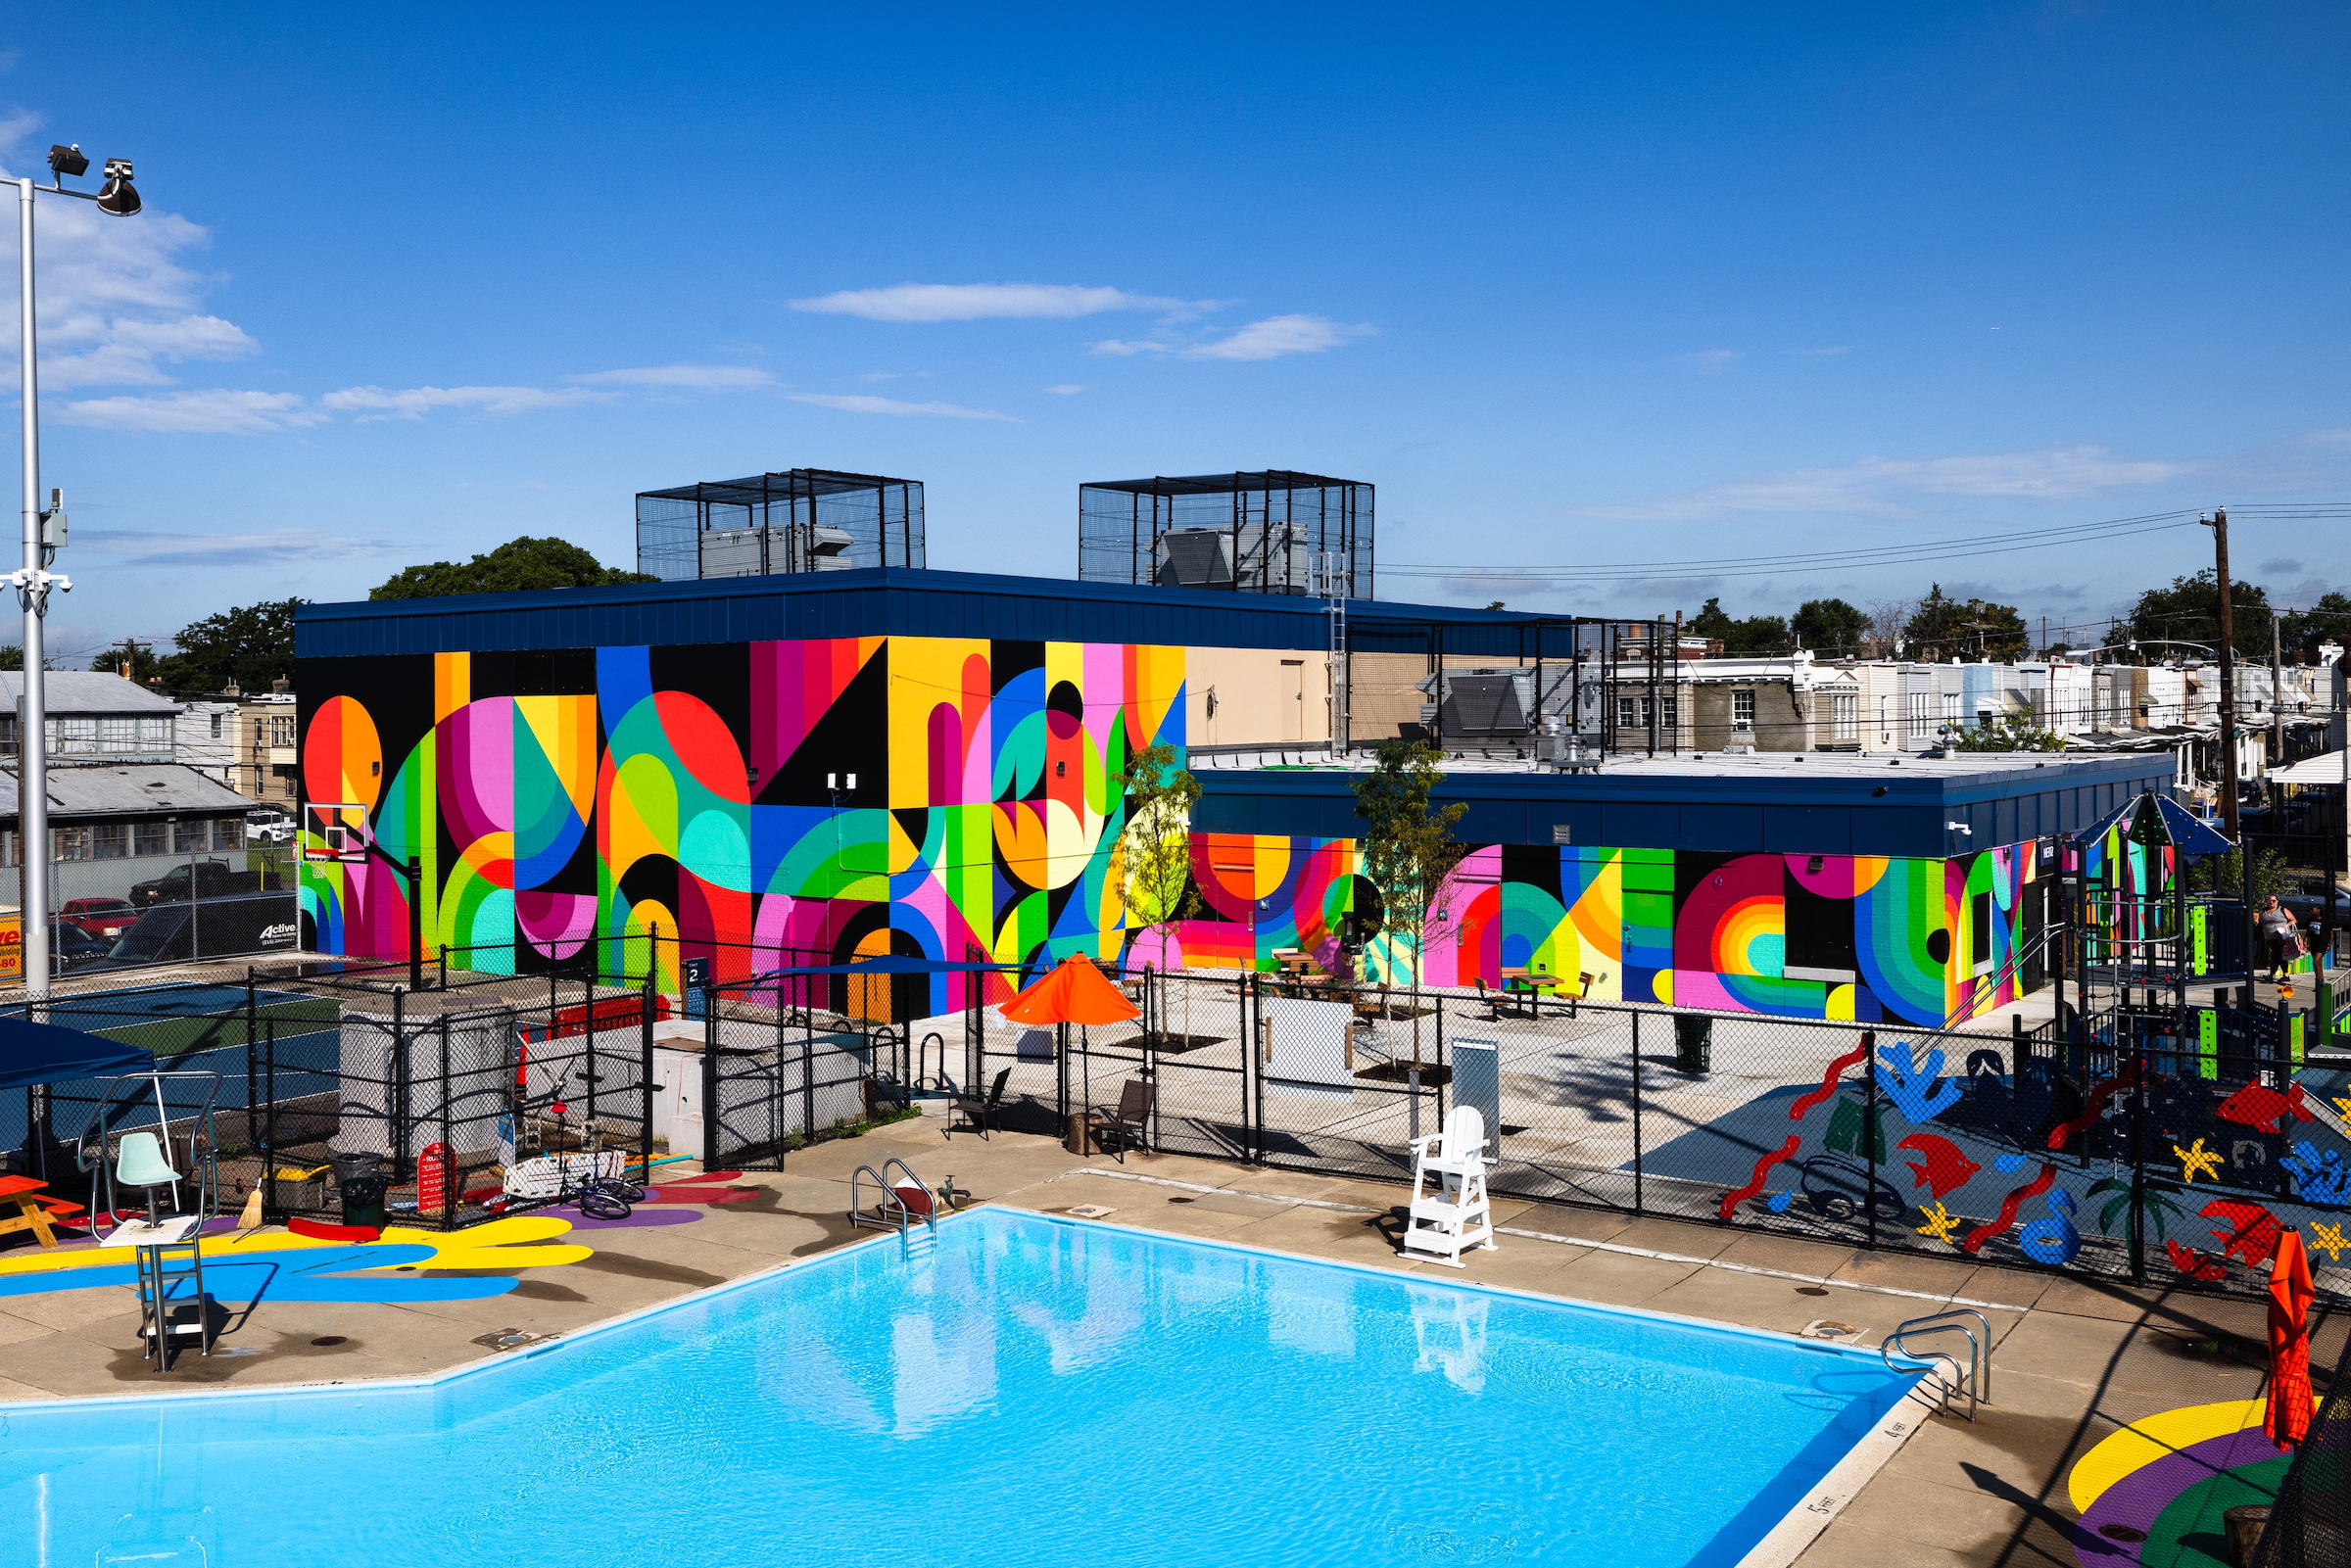 A recreation center with a colorful painted mural on the building outside by the pool.